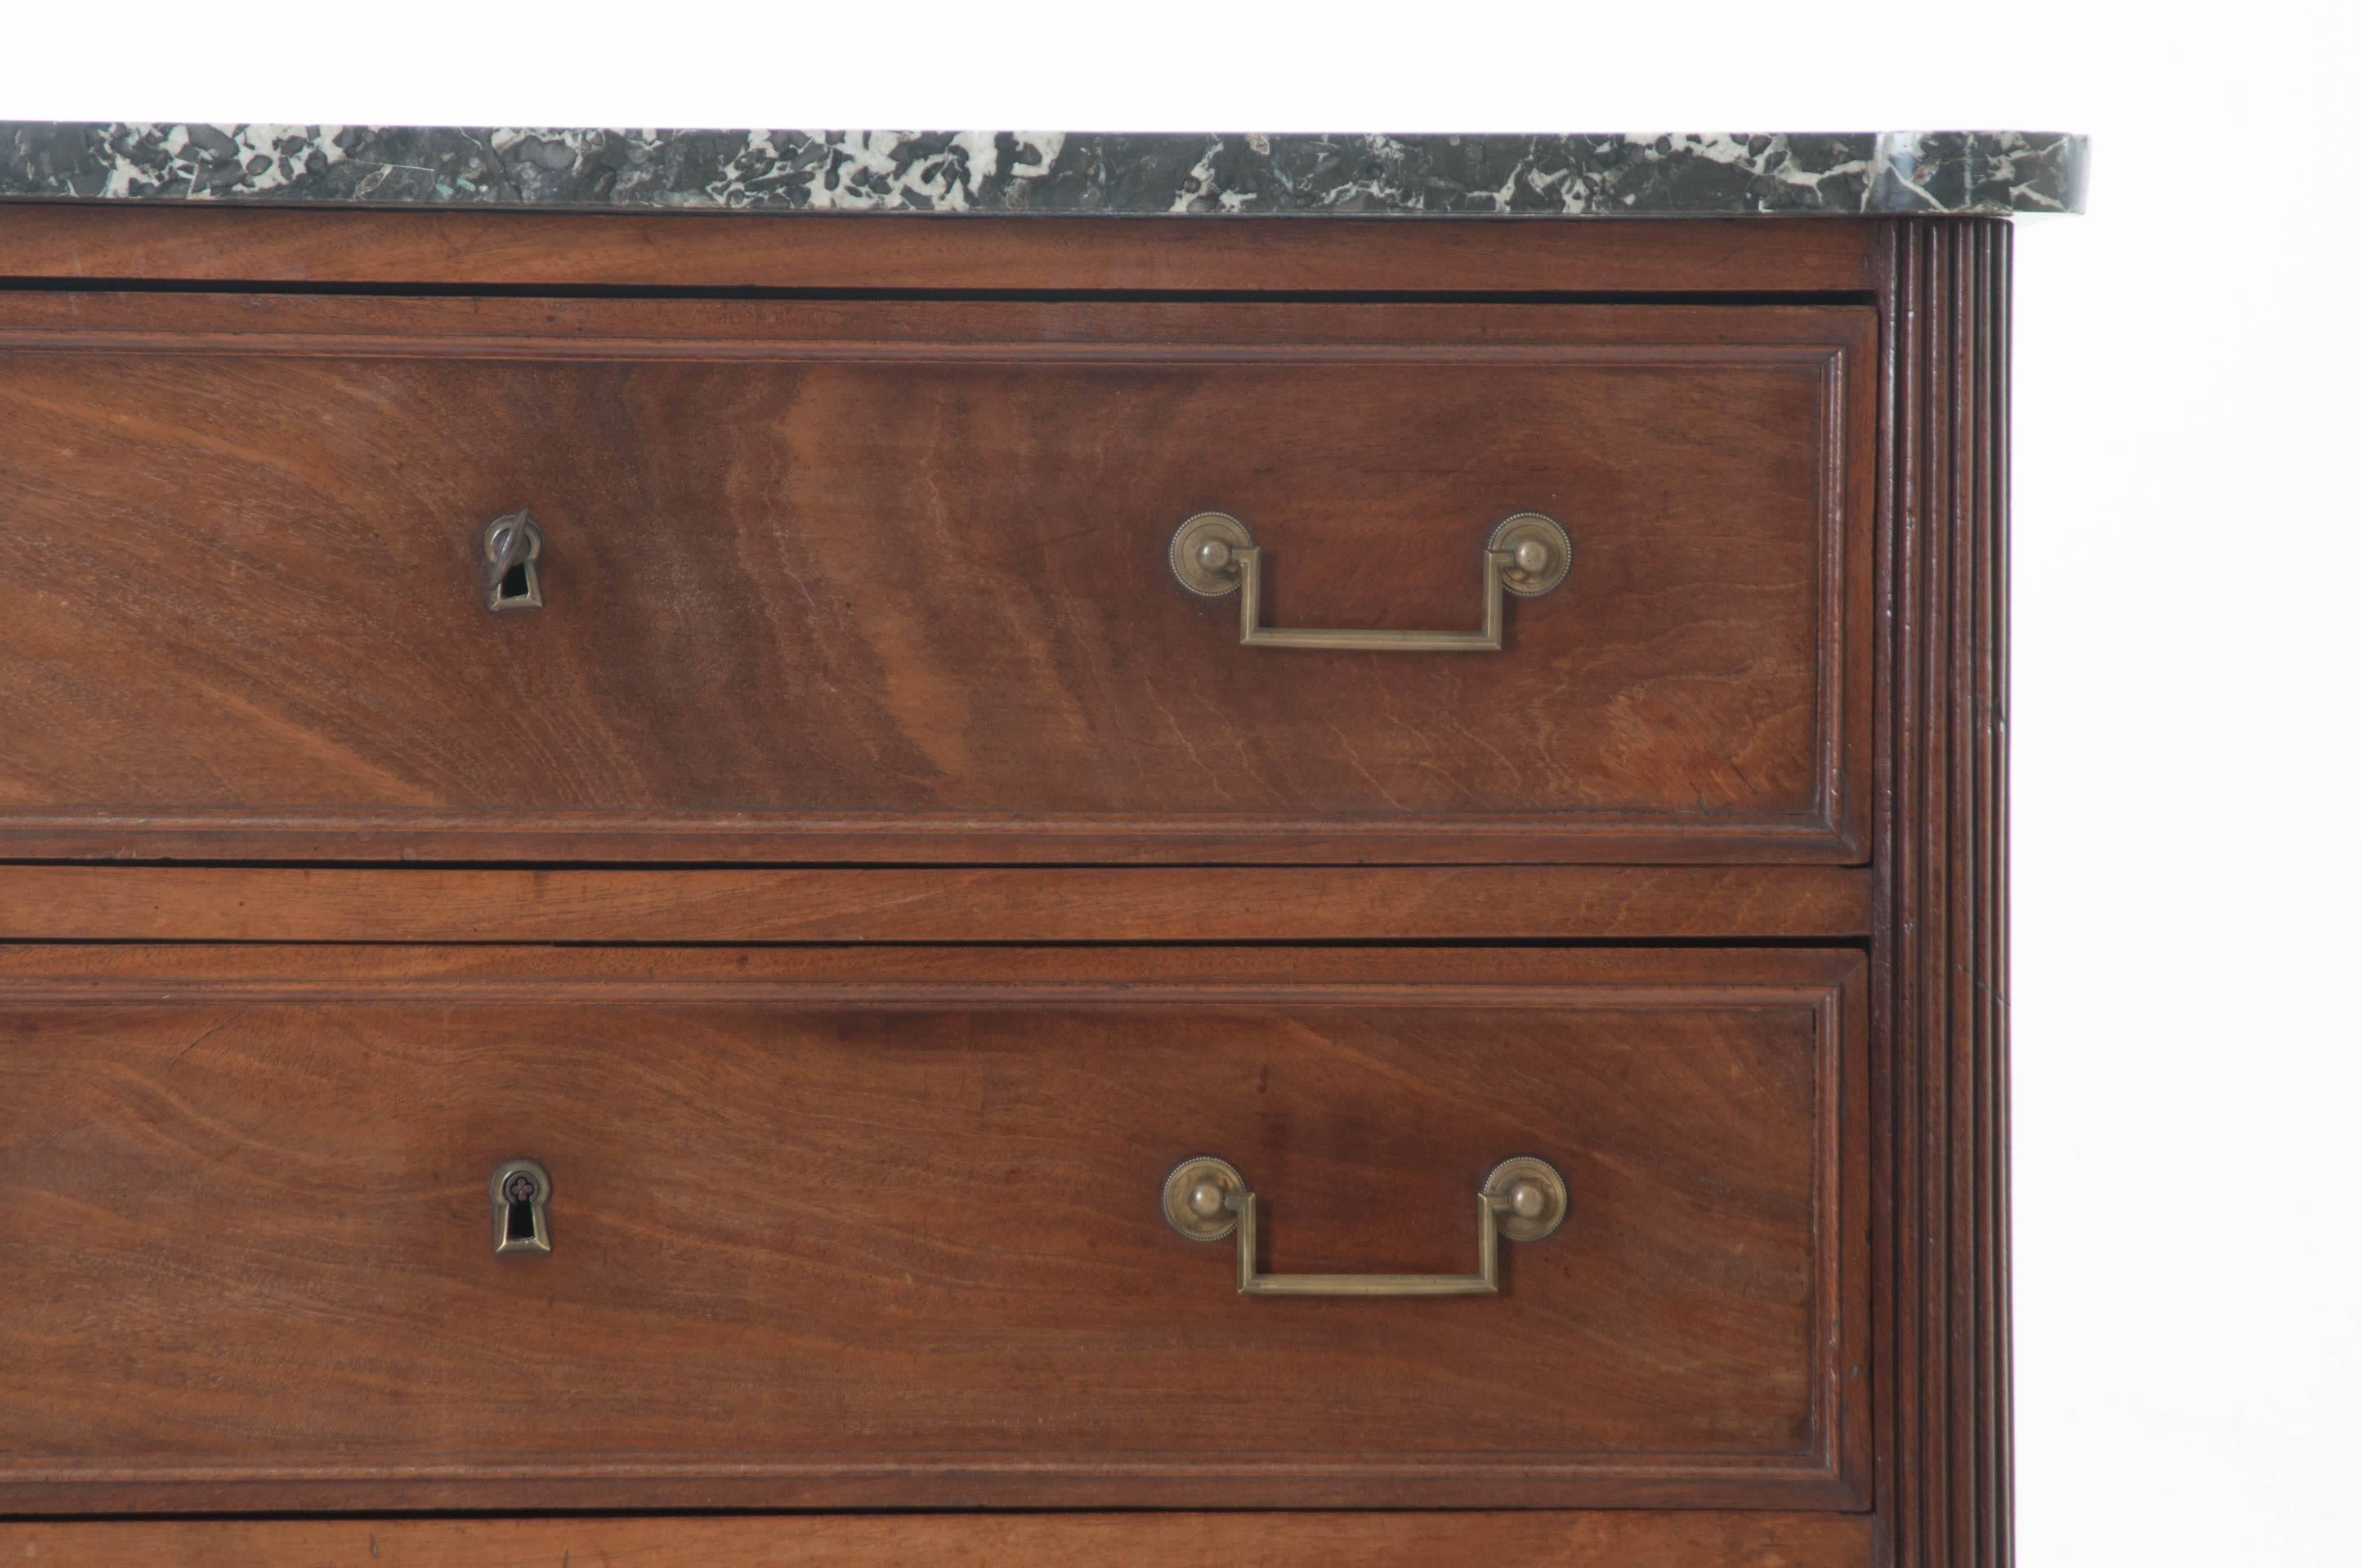 A stately three-drawer transitional walnut commode with original marble top from 19th century, France. The grey marble top is original, in great antique condition, and shaped to fit this chest perfectly. The three drawers contain working locks and